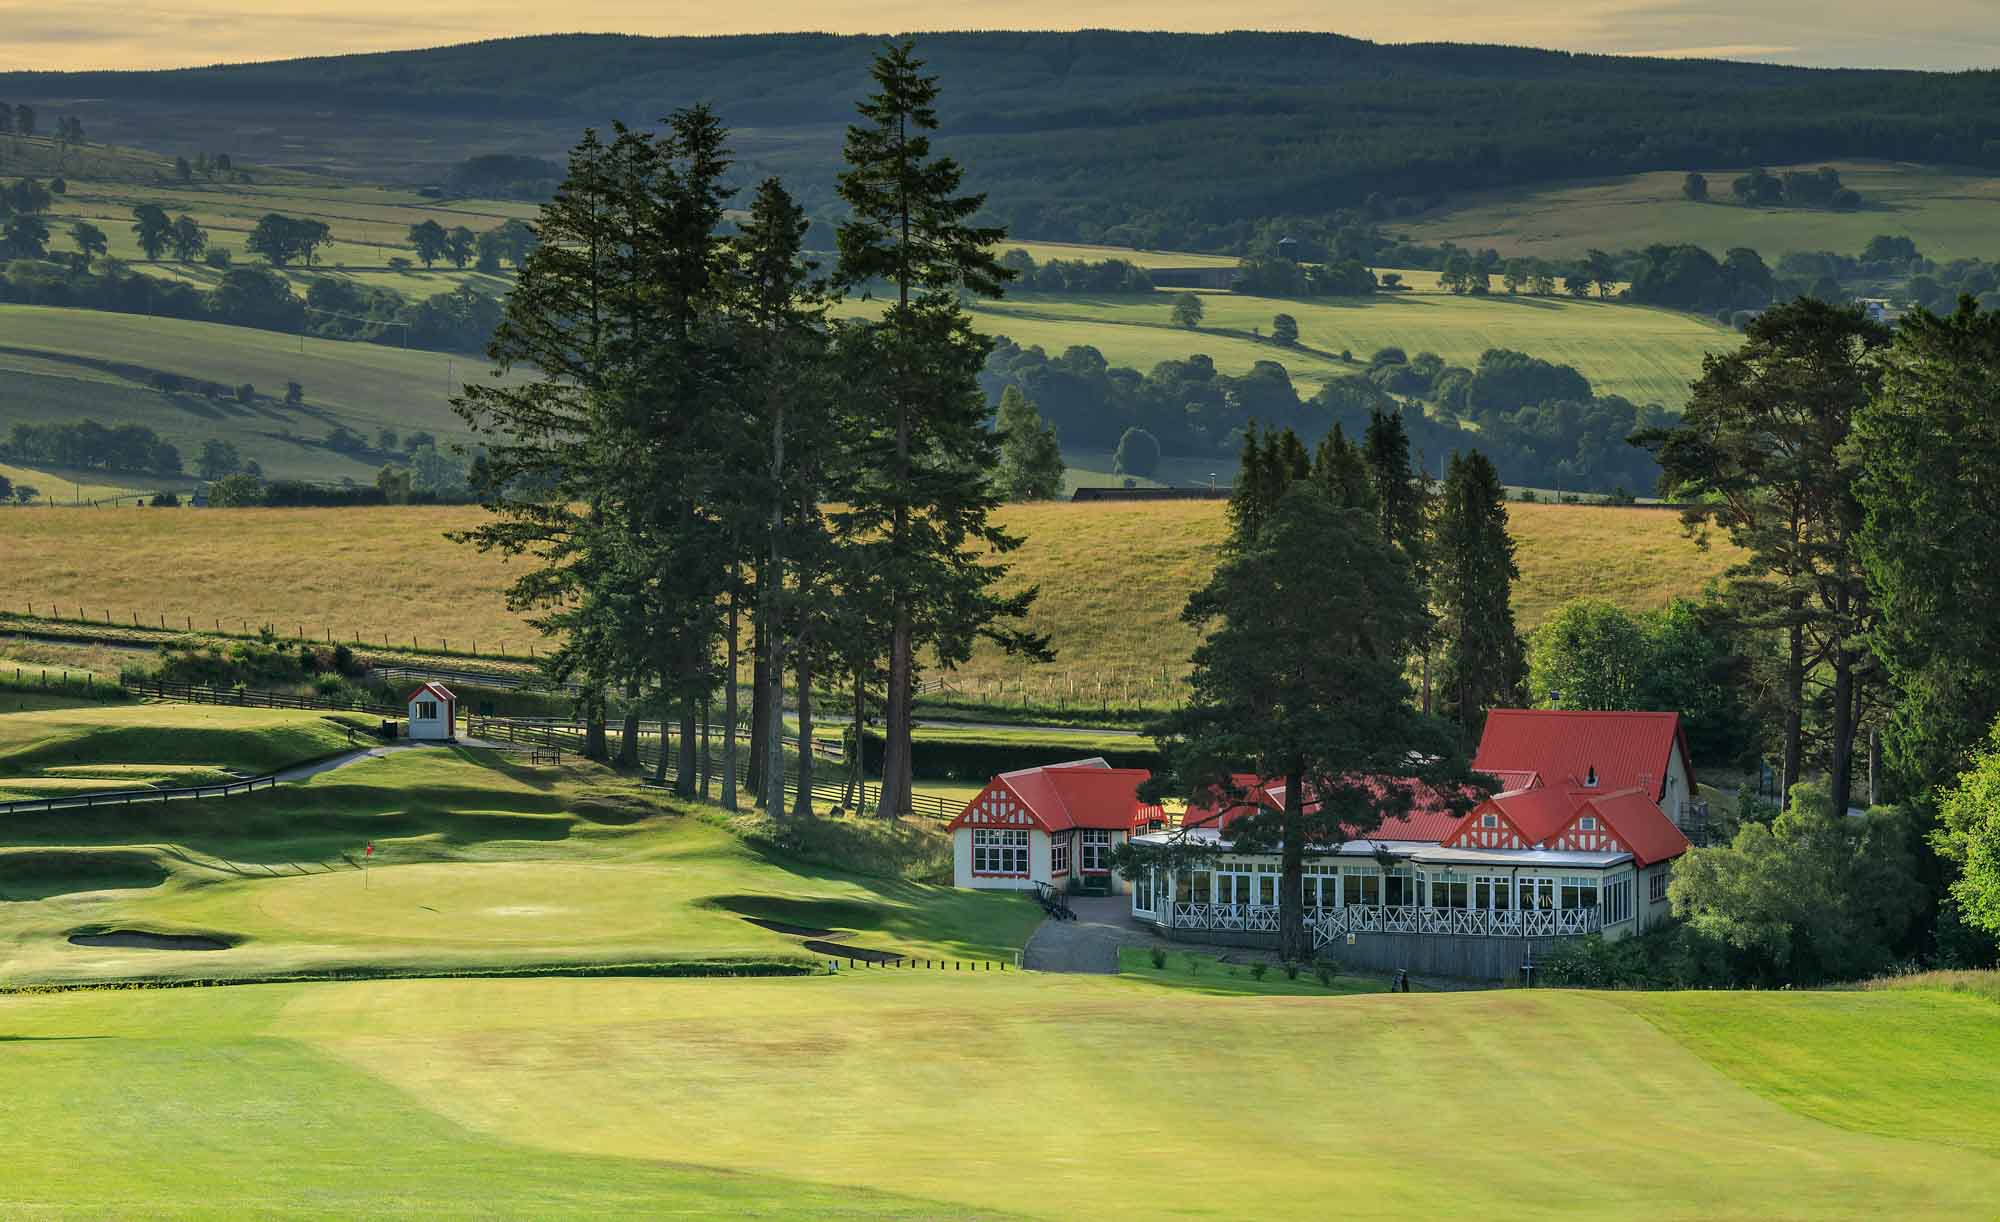 The trademark red roof of the Pitlochry Golf Club.